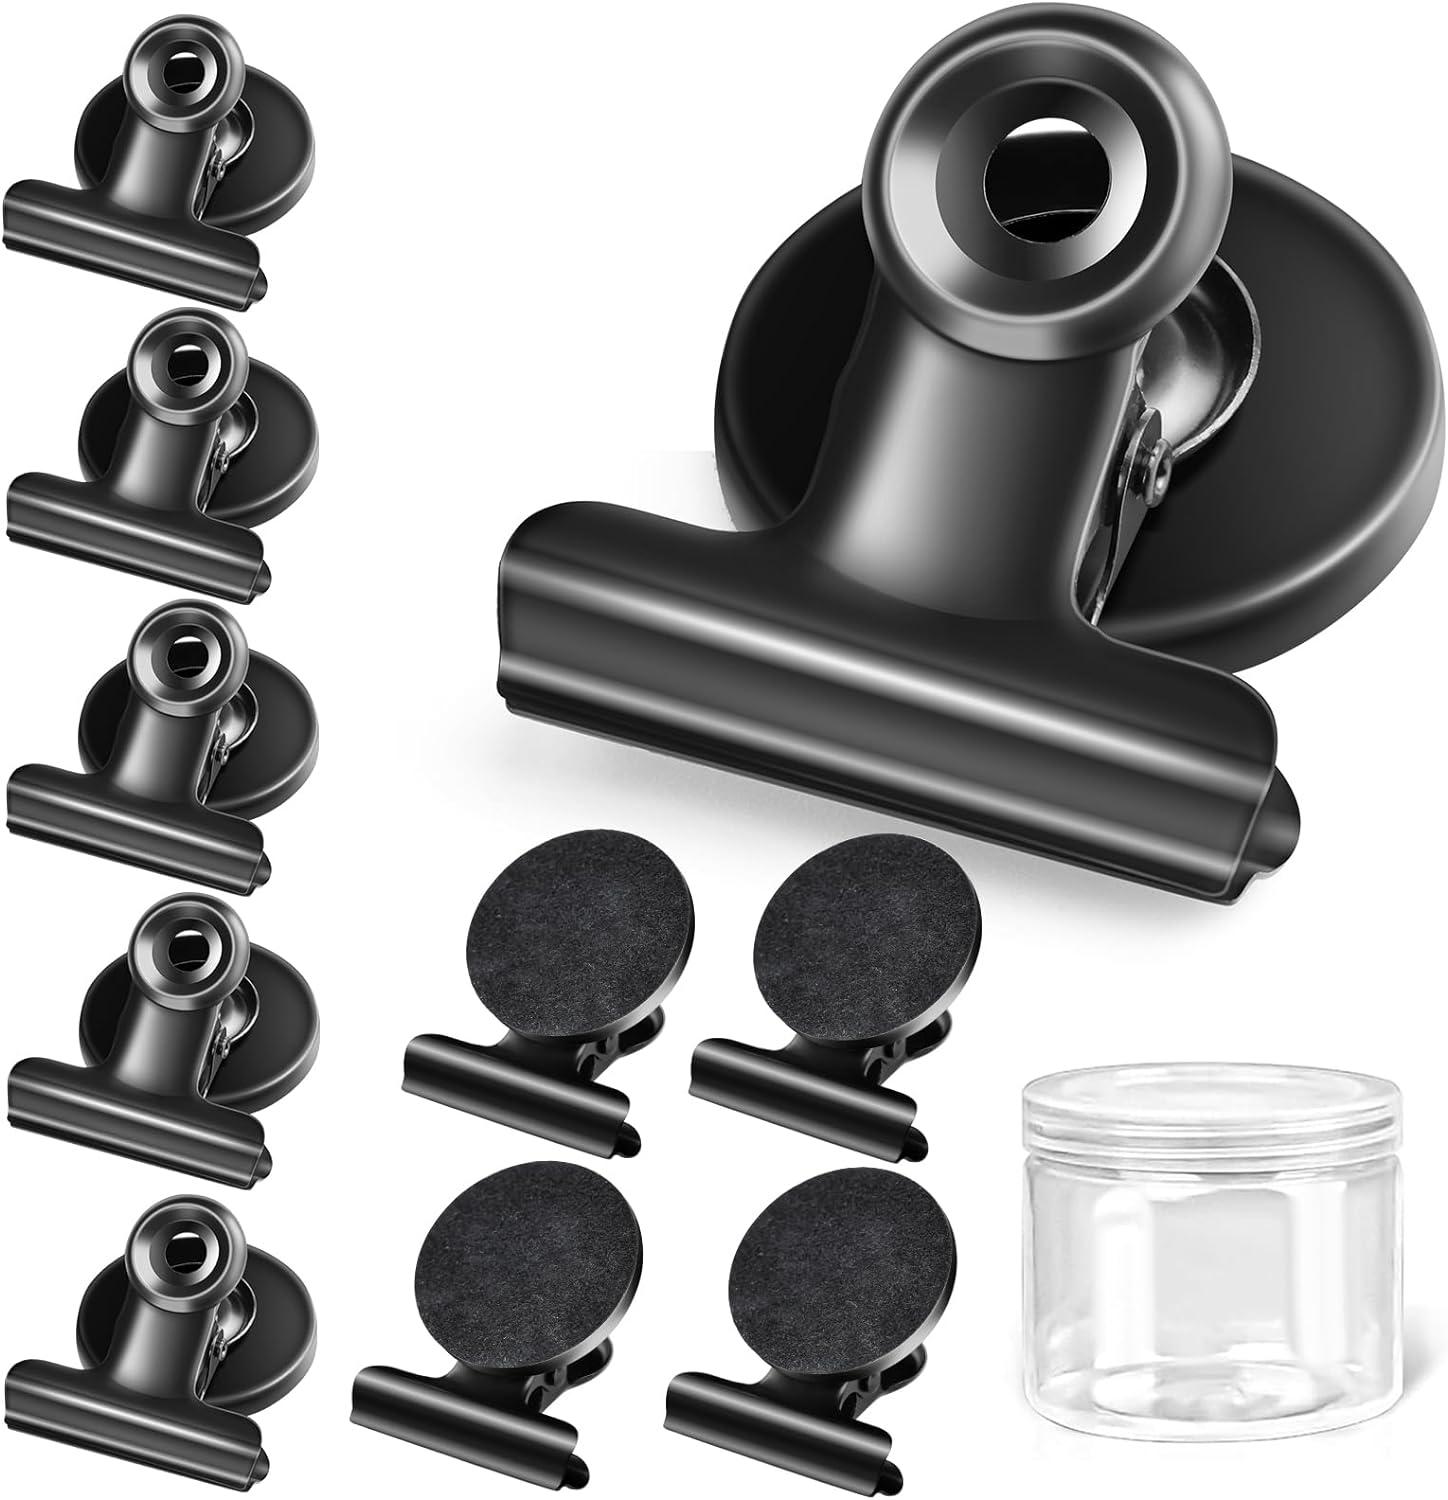 skaaisont 10 pcs magnetic clips fridge magnets have anti-scratch sticky pads magnets for whiteboard black